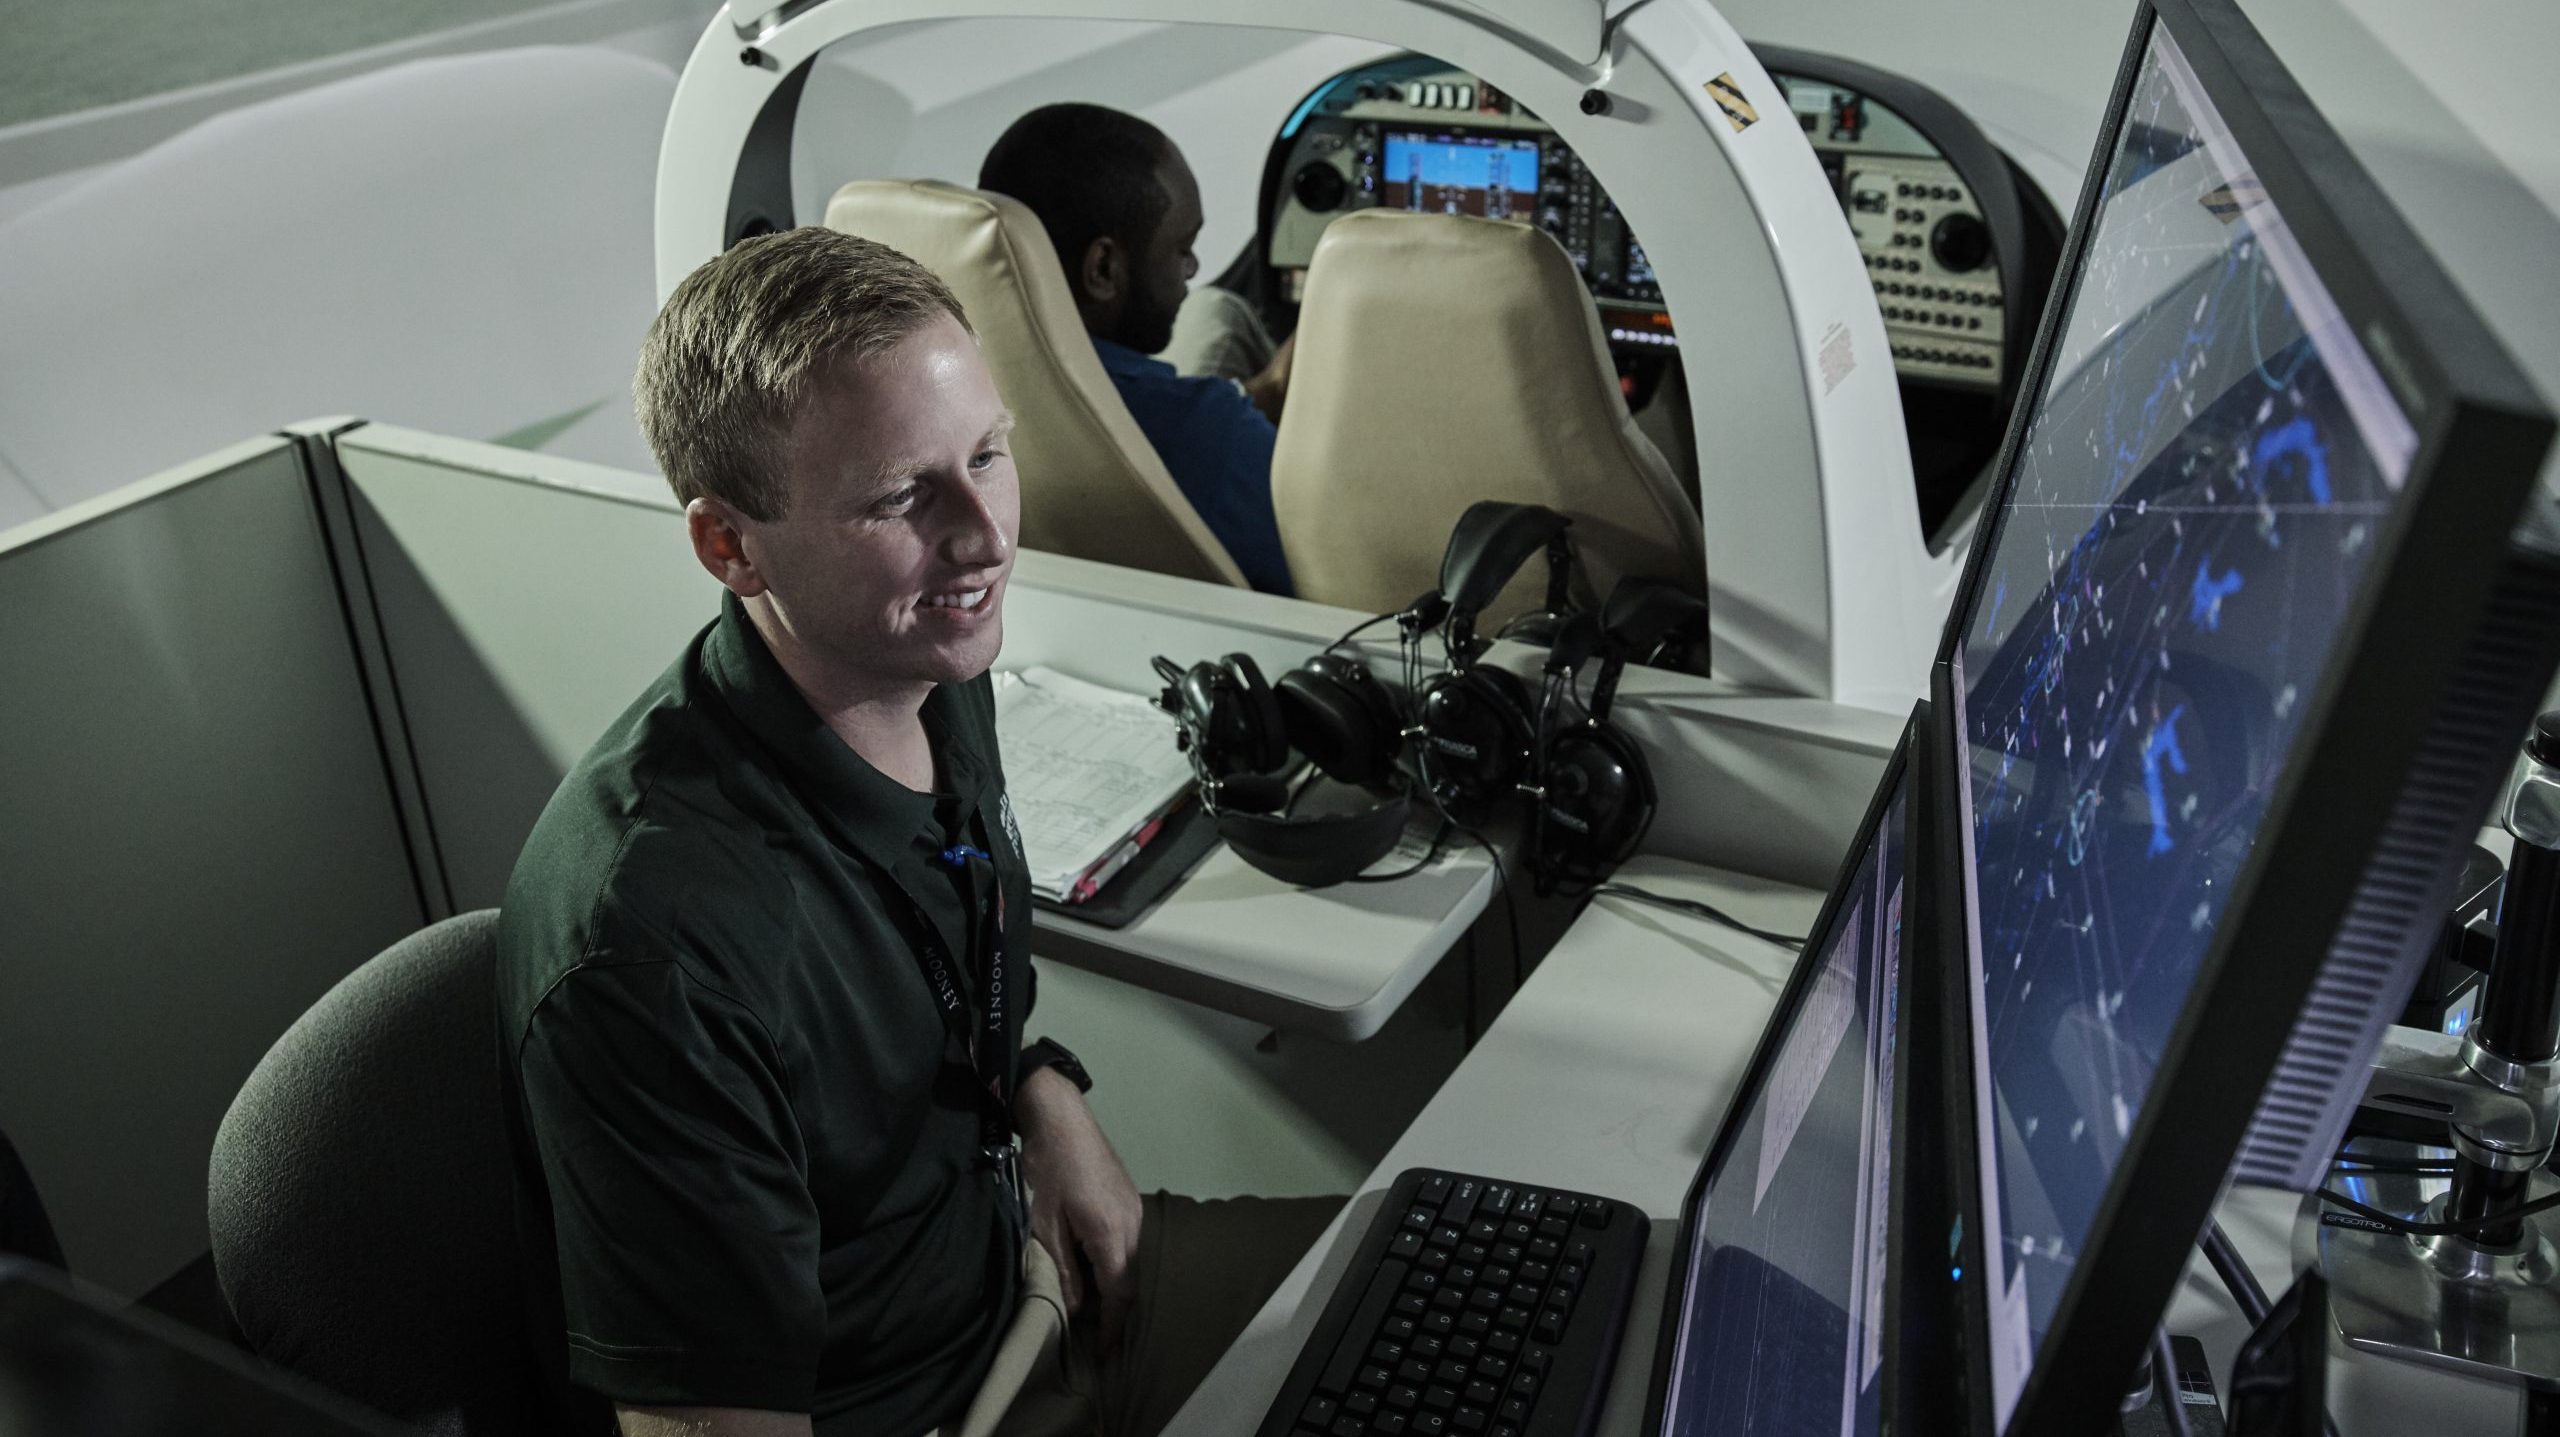 Student looking at computer screens, monitoring air traffic, while another student is in the flight simulator behind him.